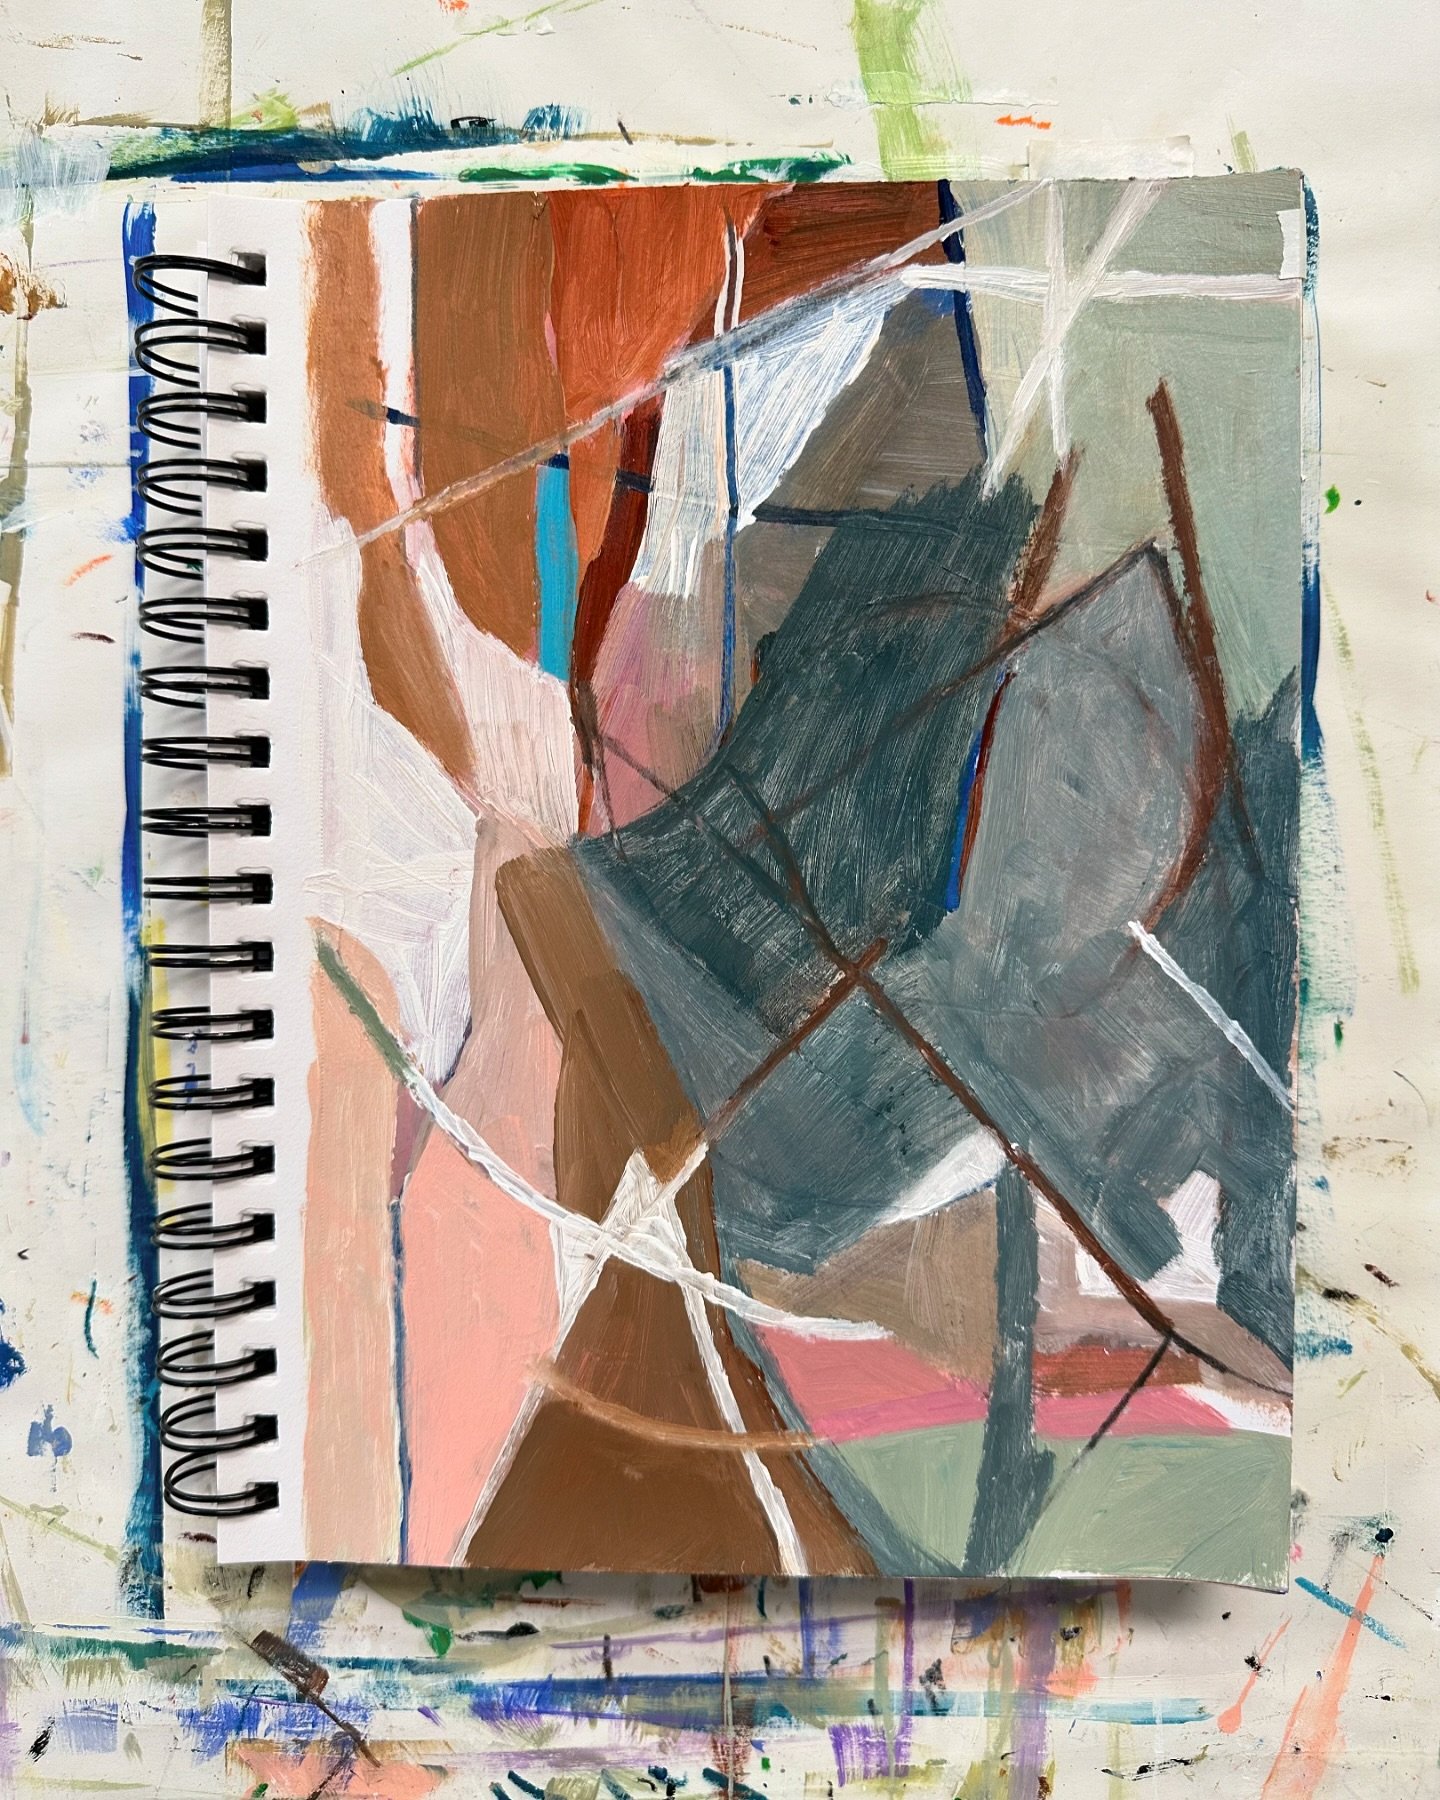 Sometimes I write about painting, and sometimes I paint with words. The two processes seem entangled like a twisted river that keeps gushing downstream. I get lost in the lines and the marks on the page. The letters and shapes blend together. Like my